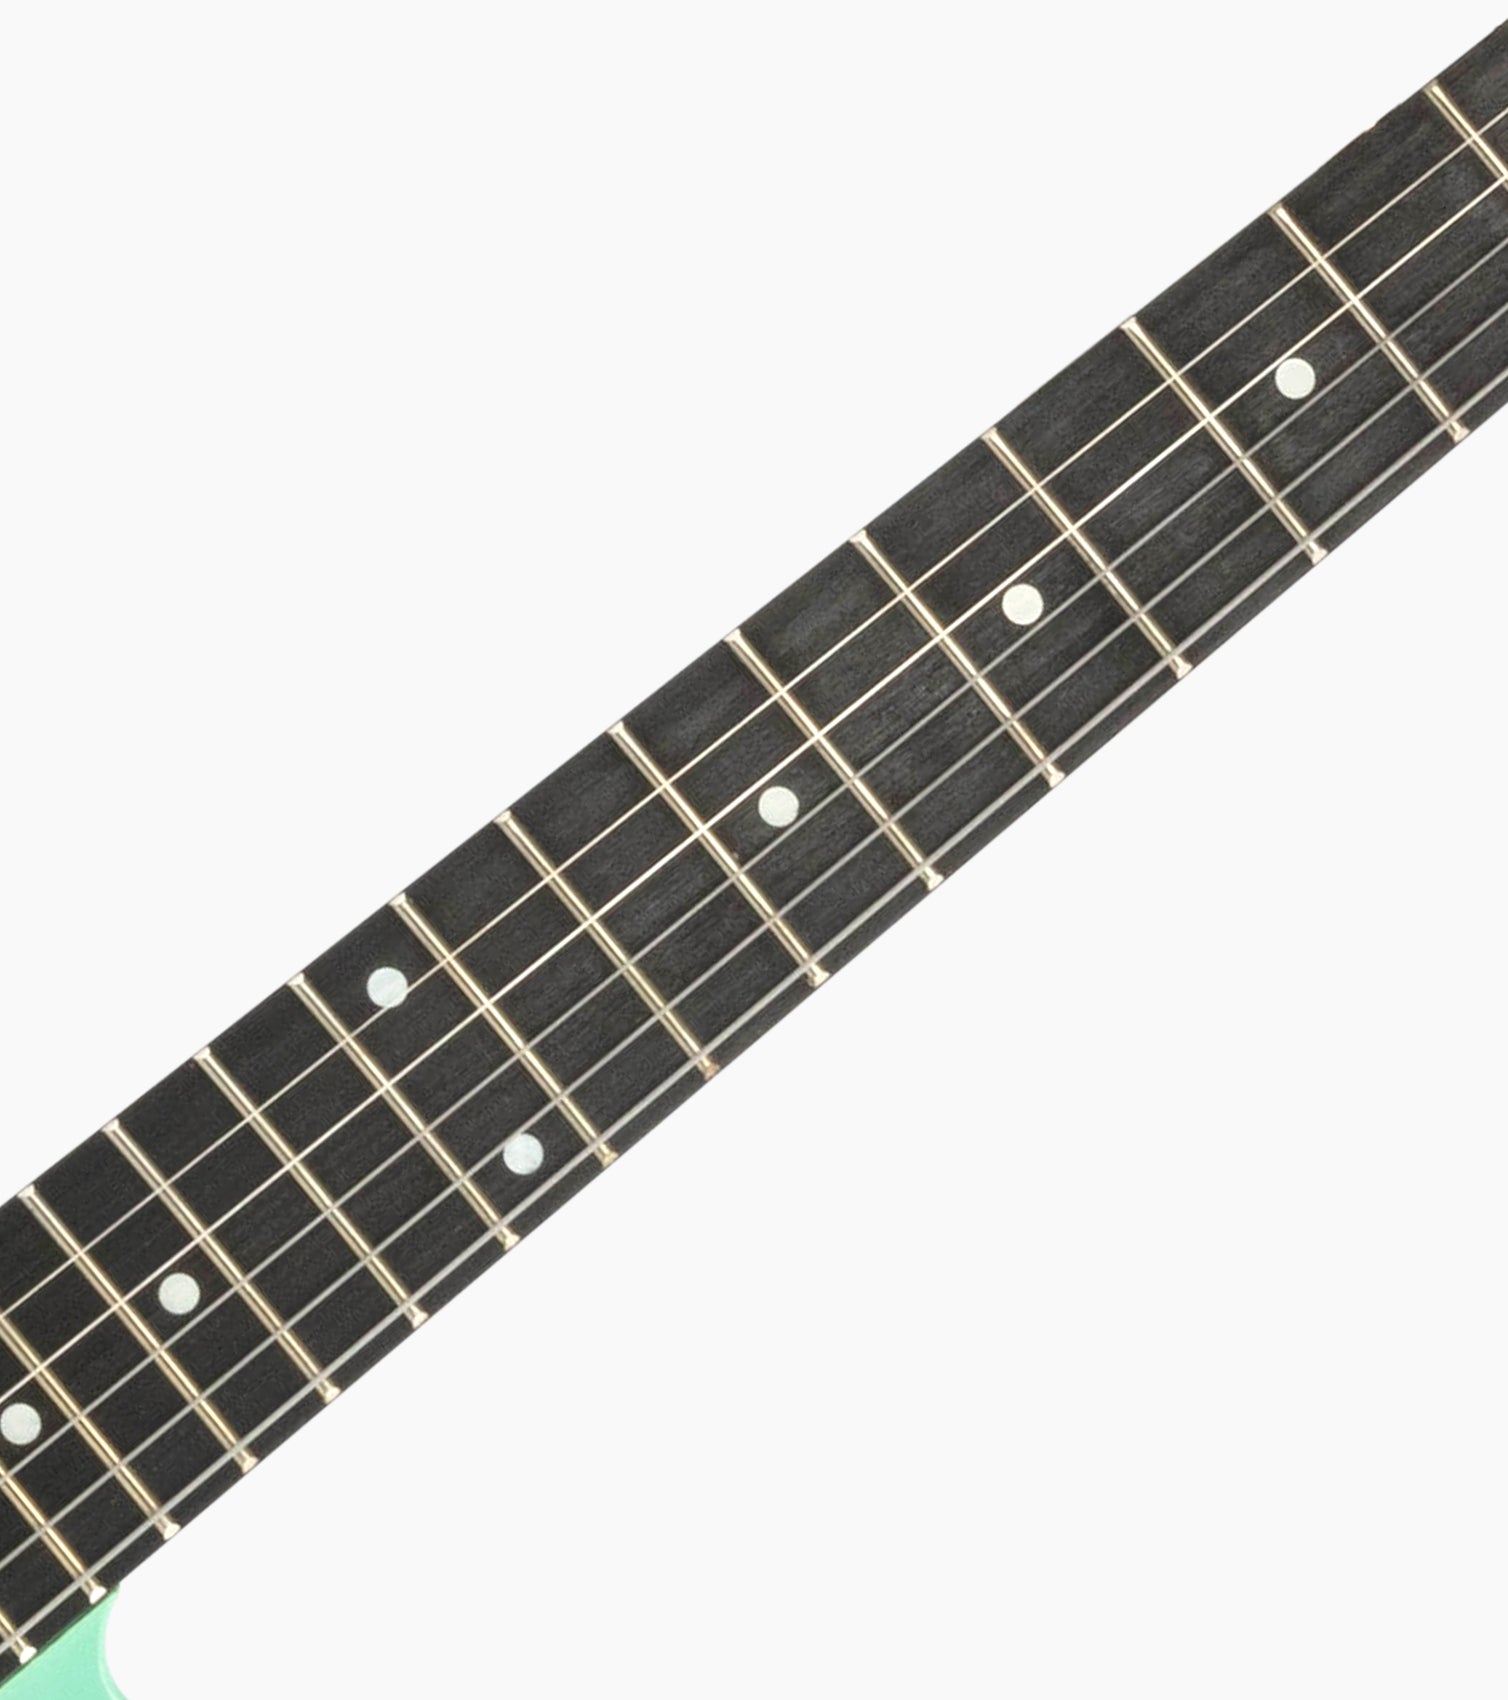 close-up of Green Left Handed single-cutaway electric guitar fretboard